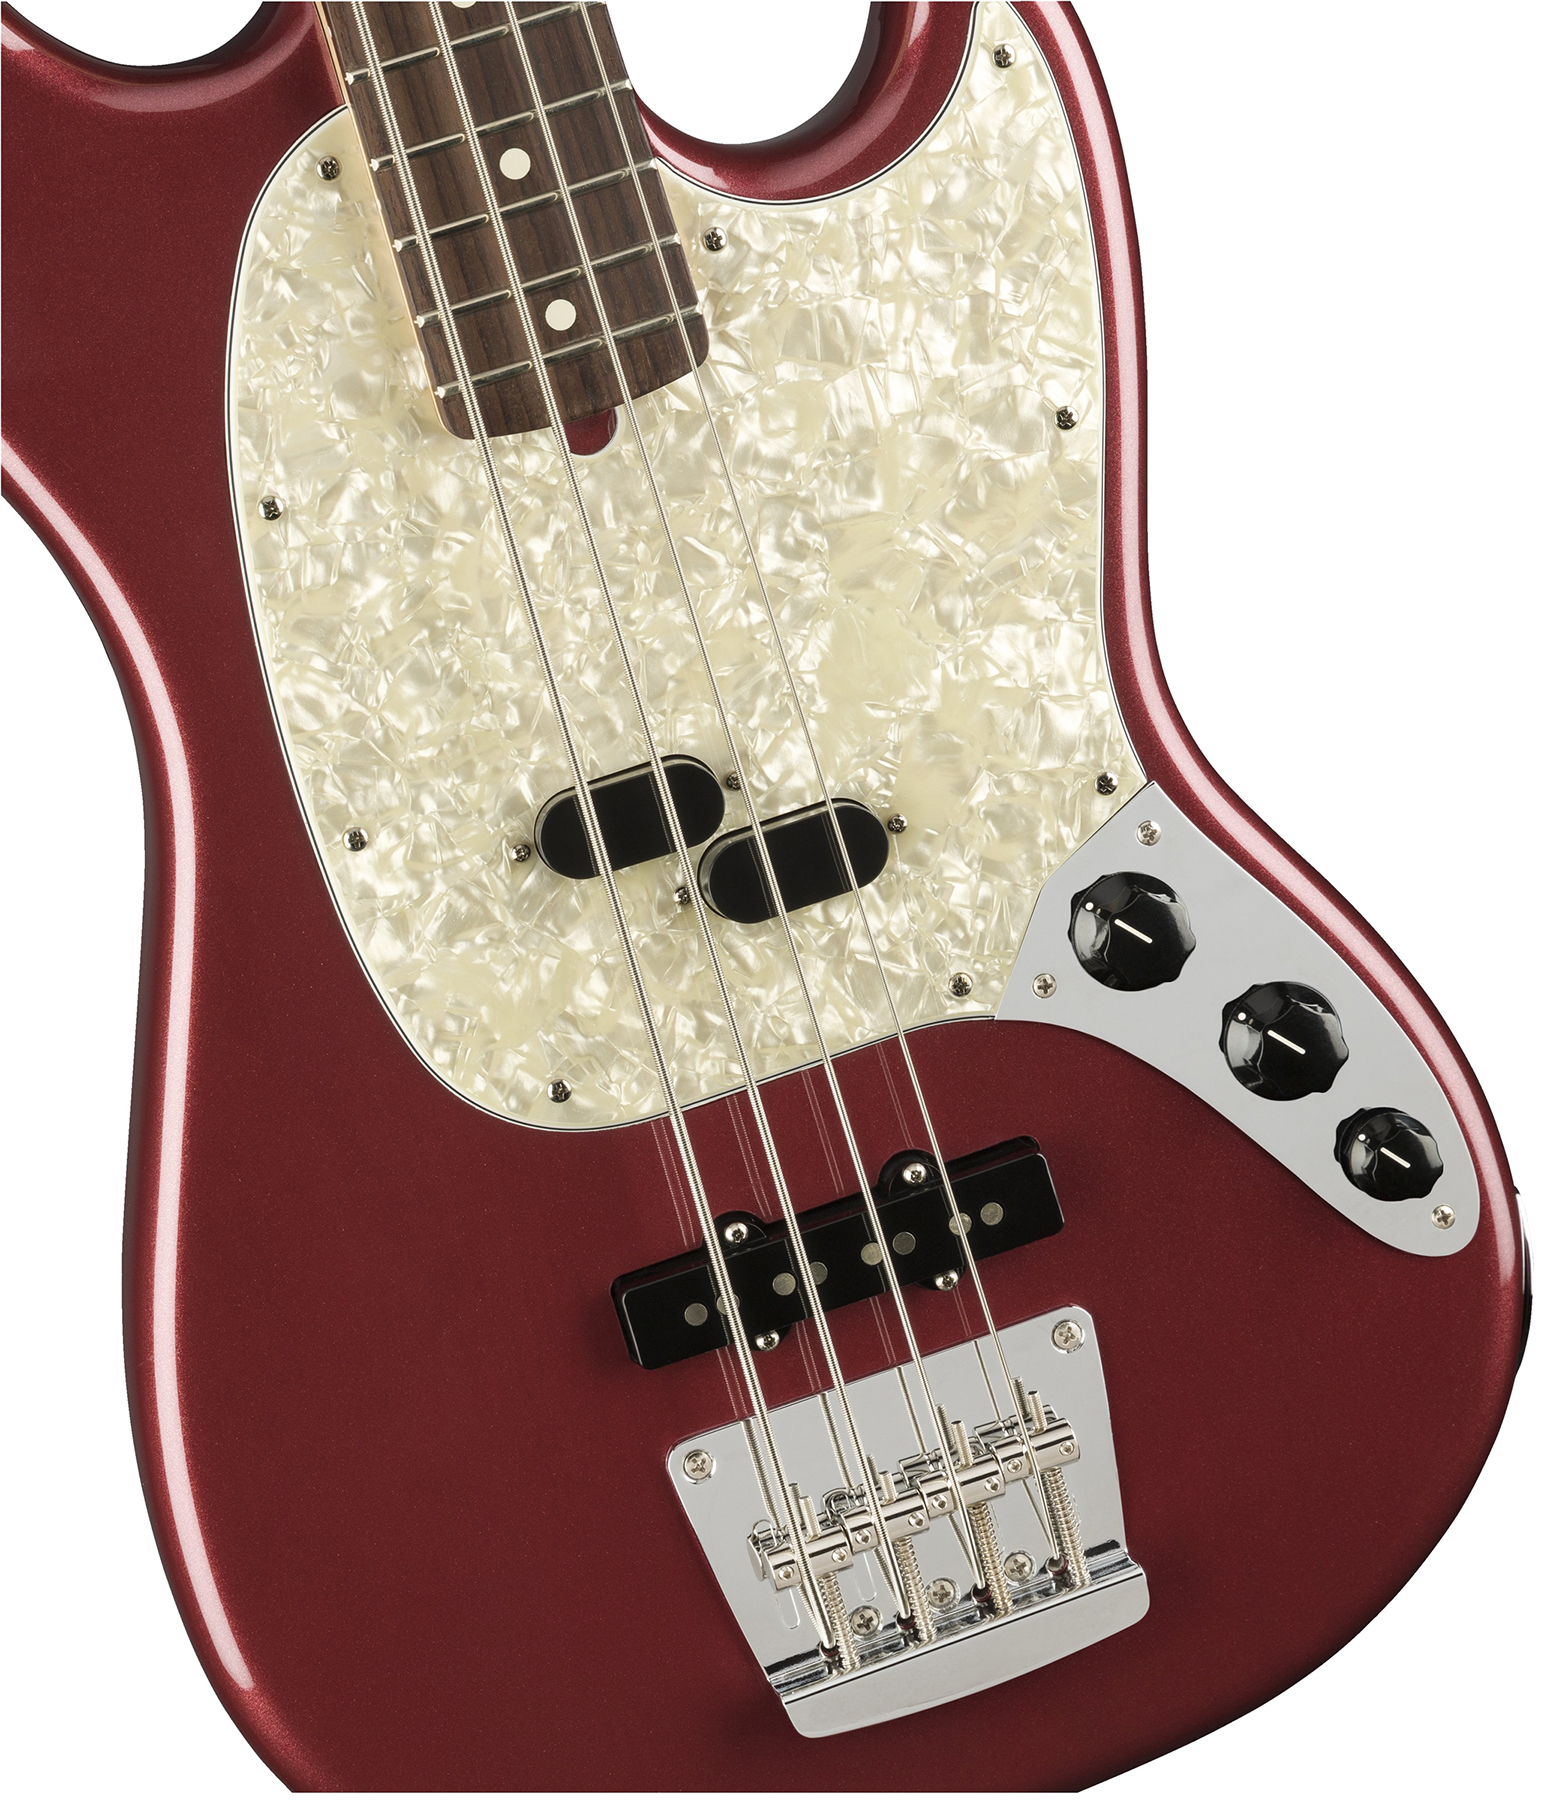 Fender Mustang Bass American Performer Usa Rw - Aubergine - Electric bass for kids - Variation 2